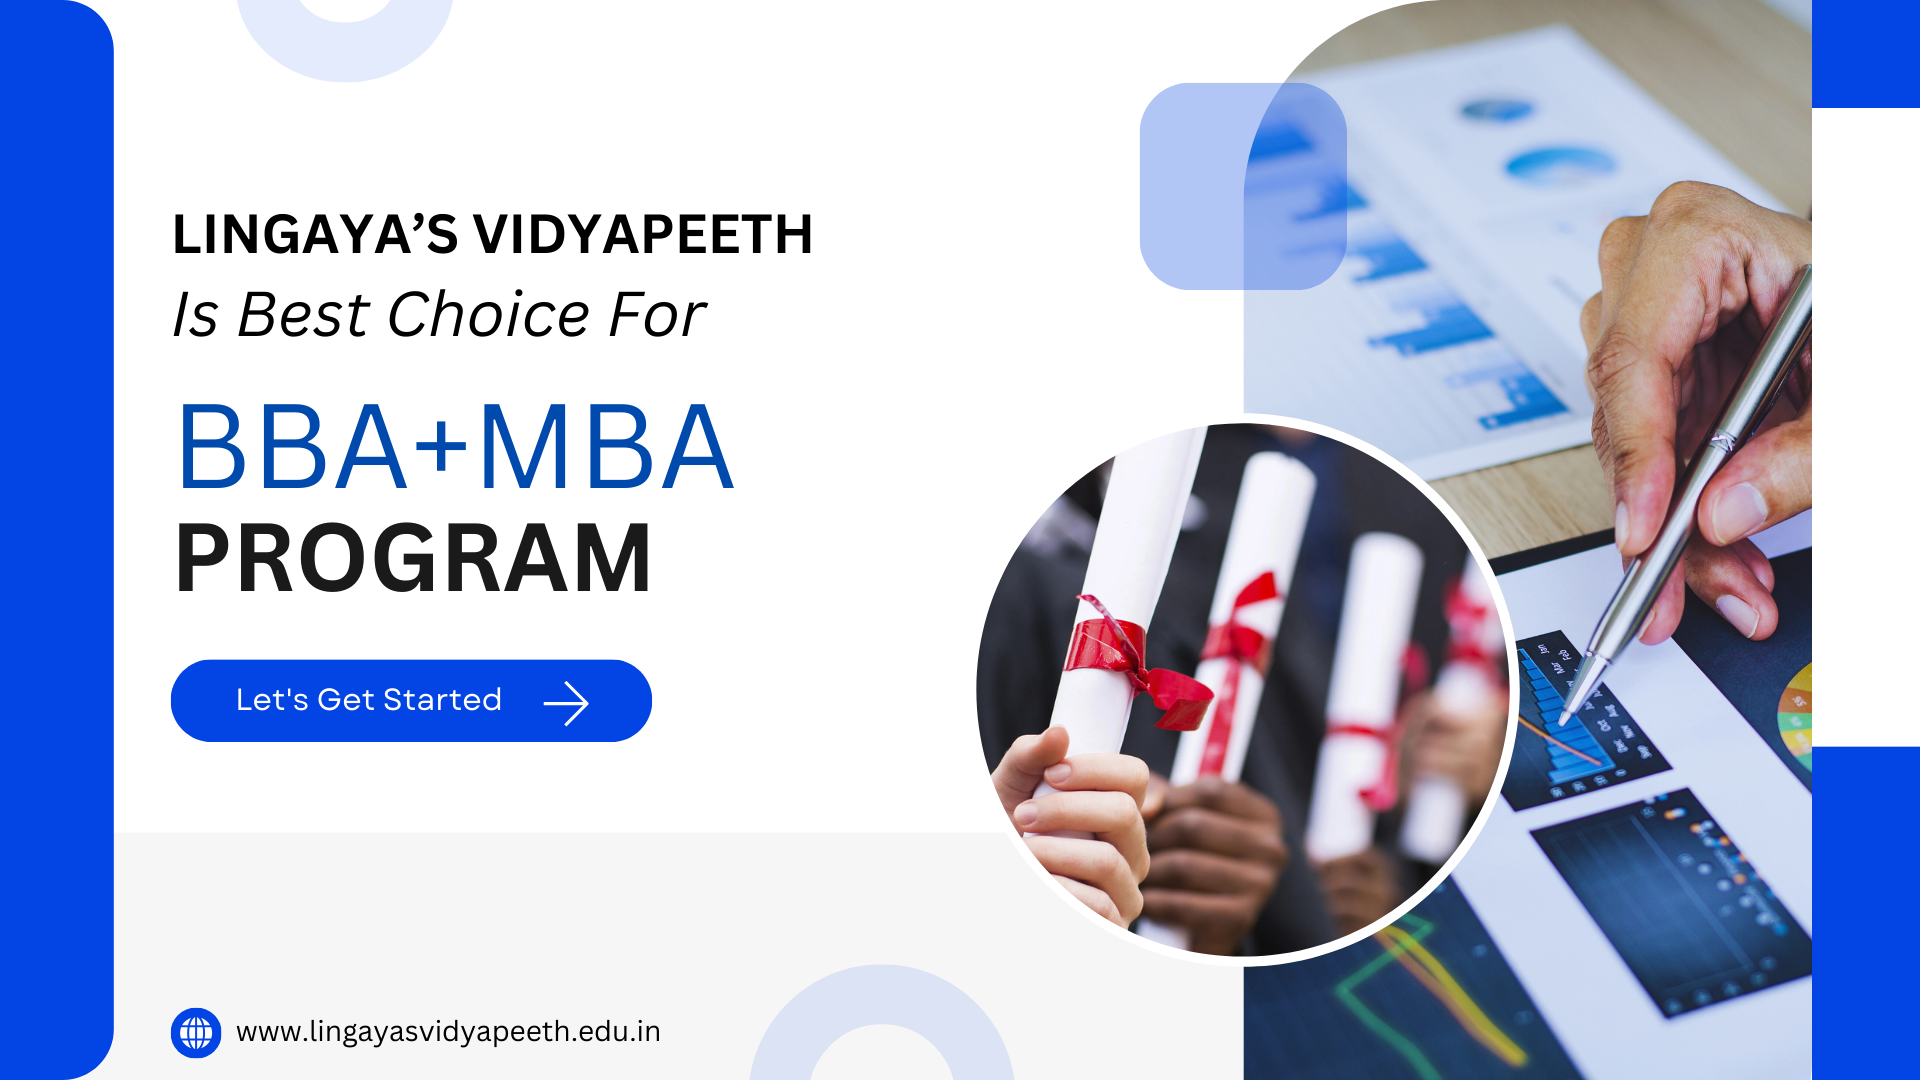 Top 10 Reasons Lingaya’s Vidyapeeth is Your Ideal Launchpad for a BBA+MBA Journey